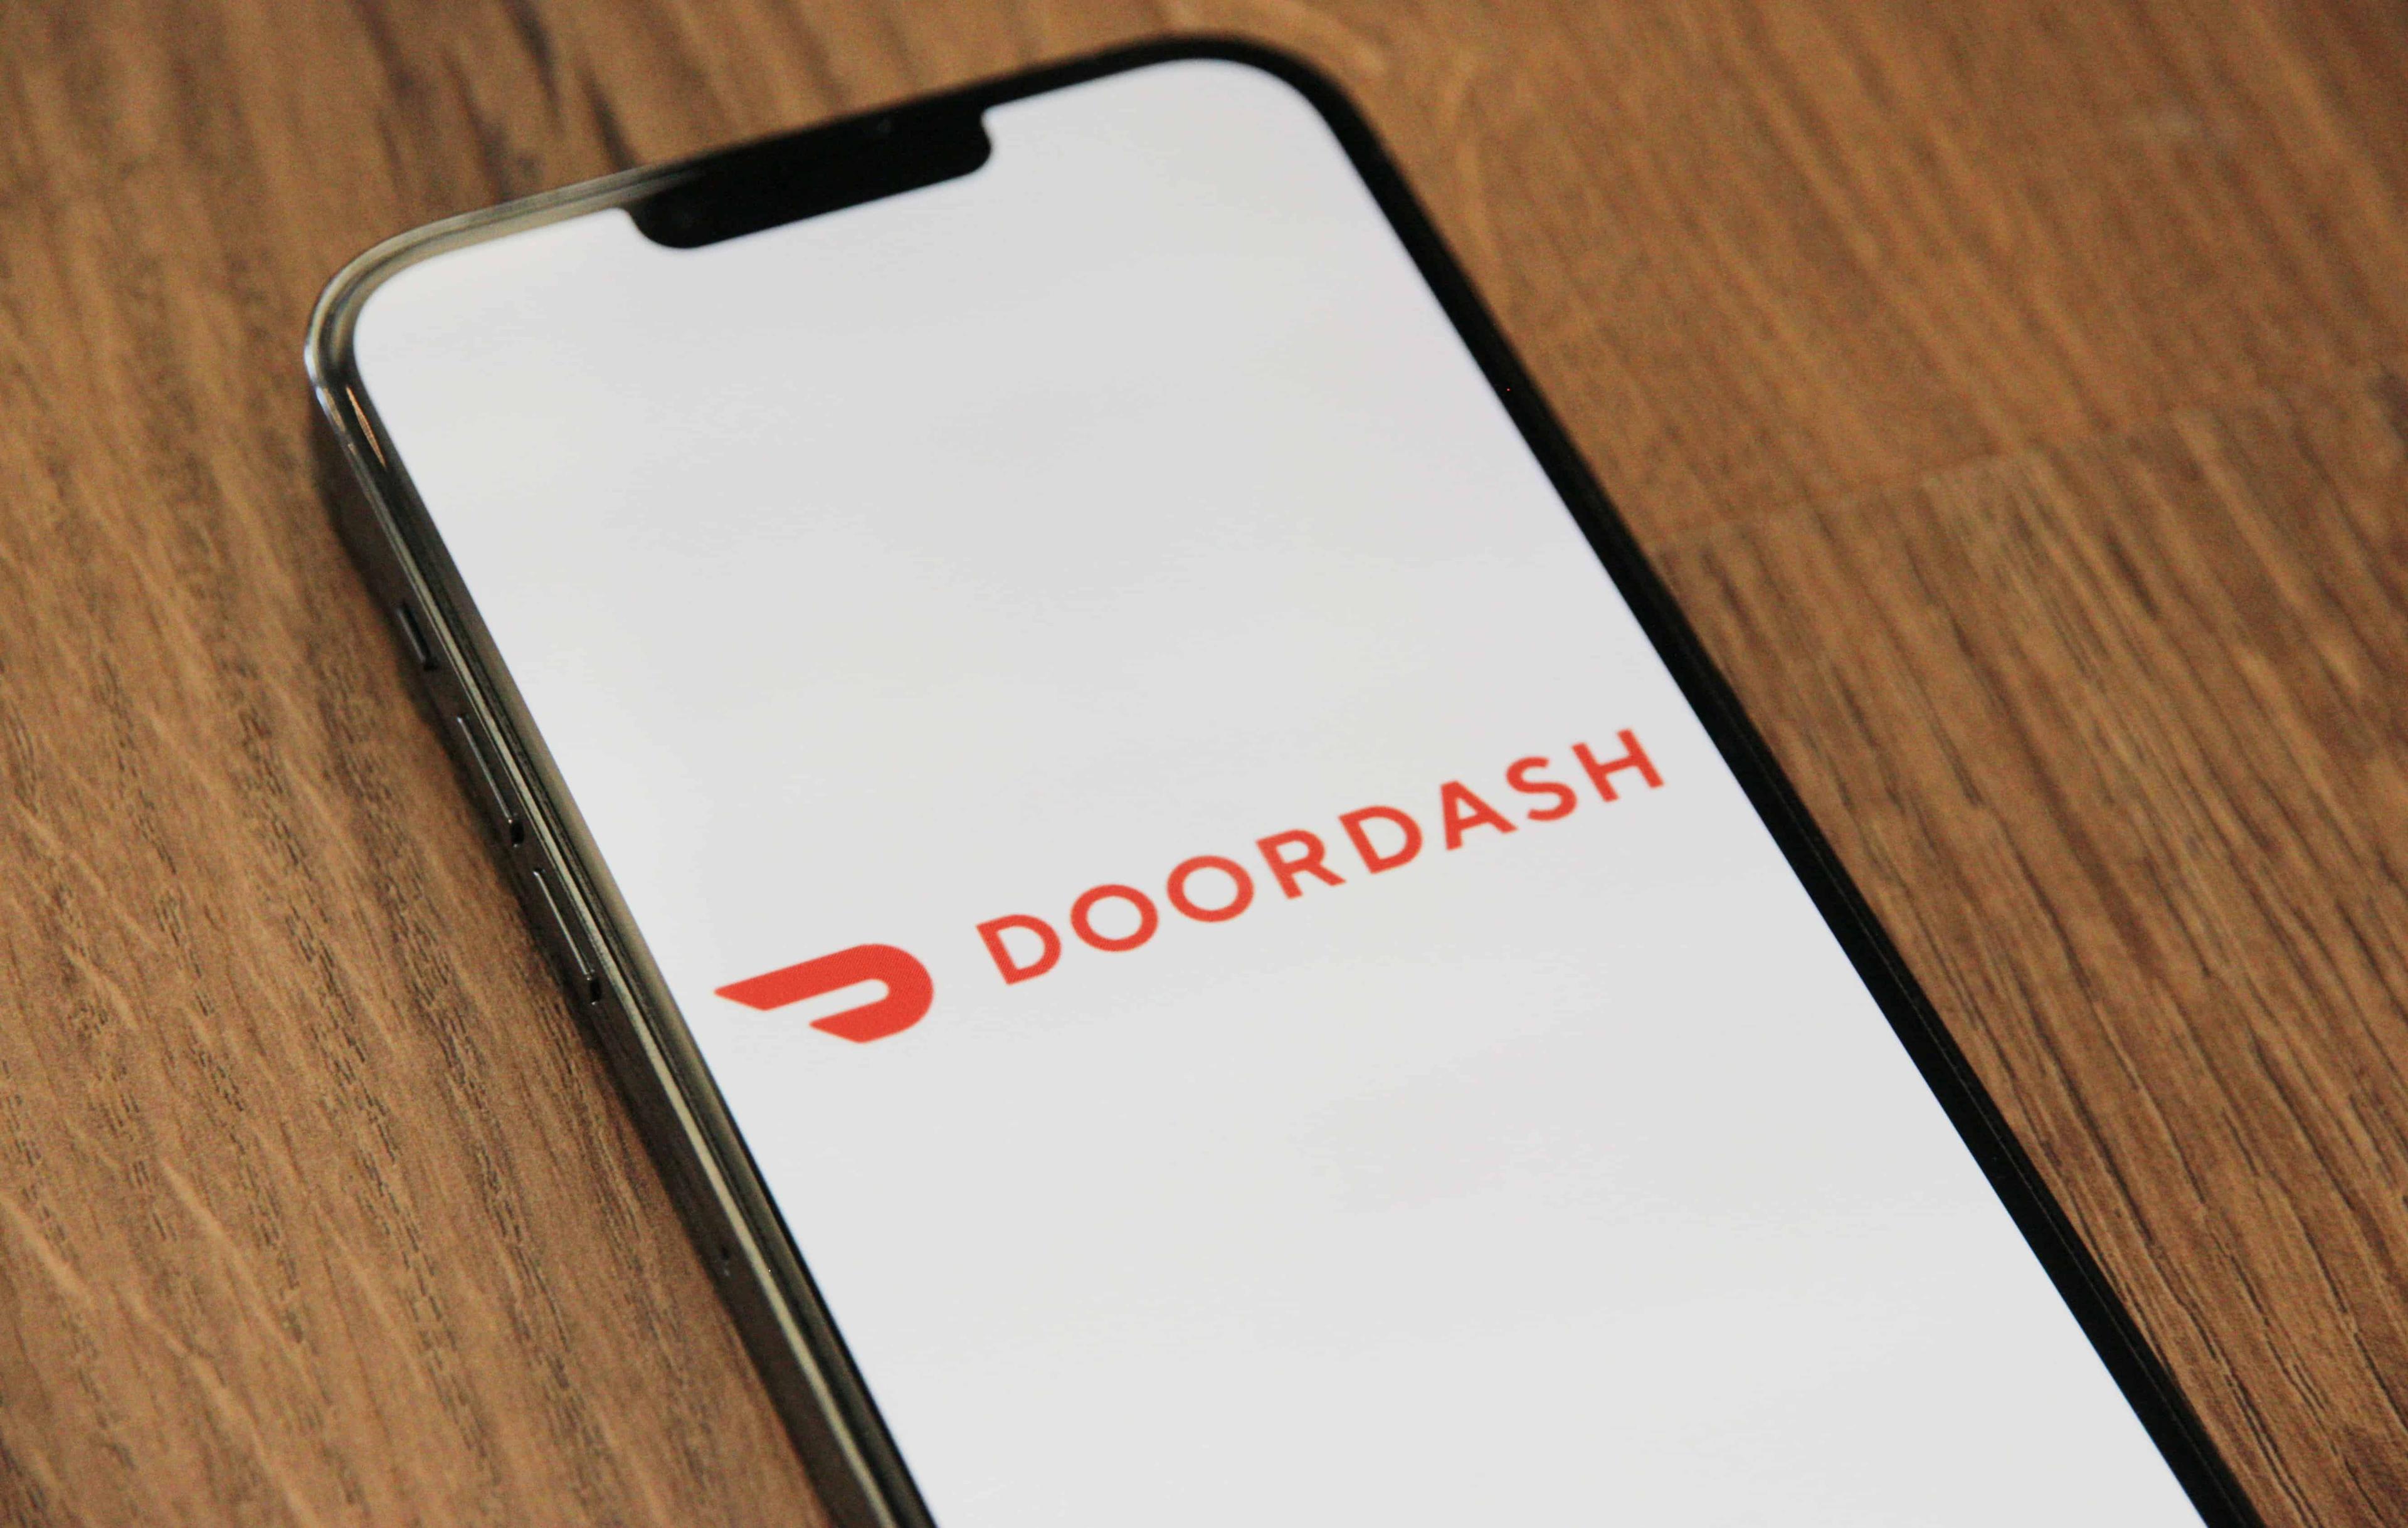 Man goes viral on TikTok for random doordash orders showing up at his house